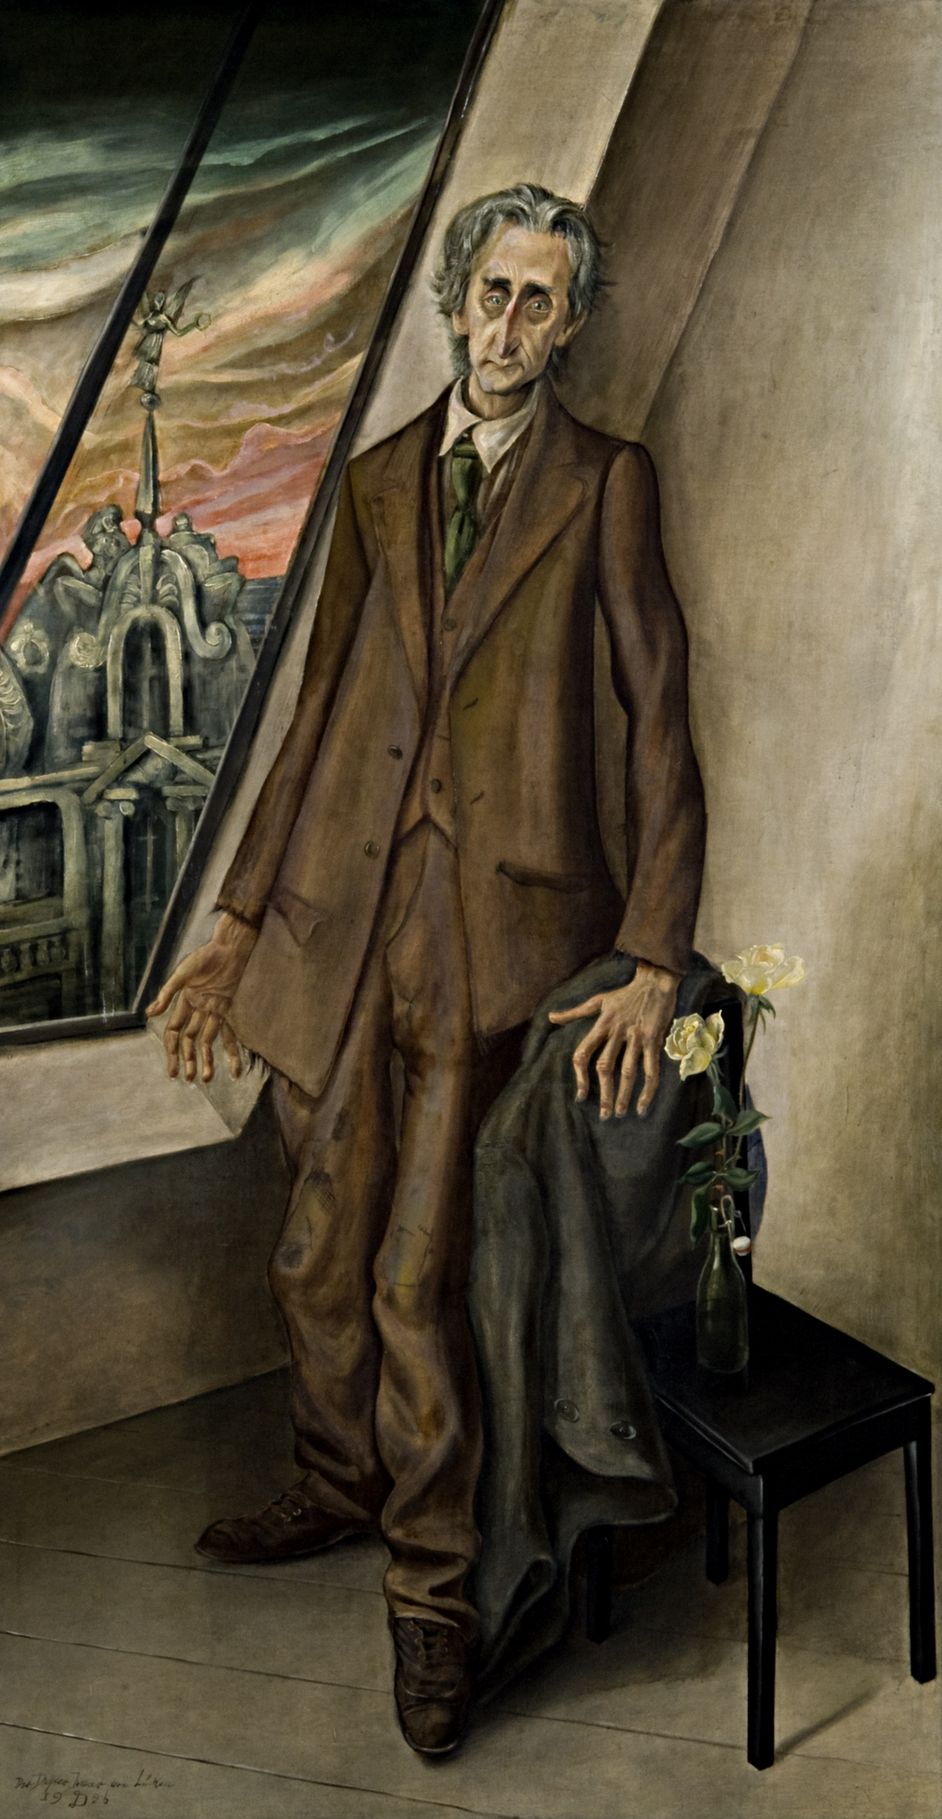 Painting by Otto Dix, oil and tempera on canvas, 226 x 120 cm